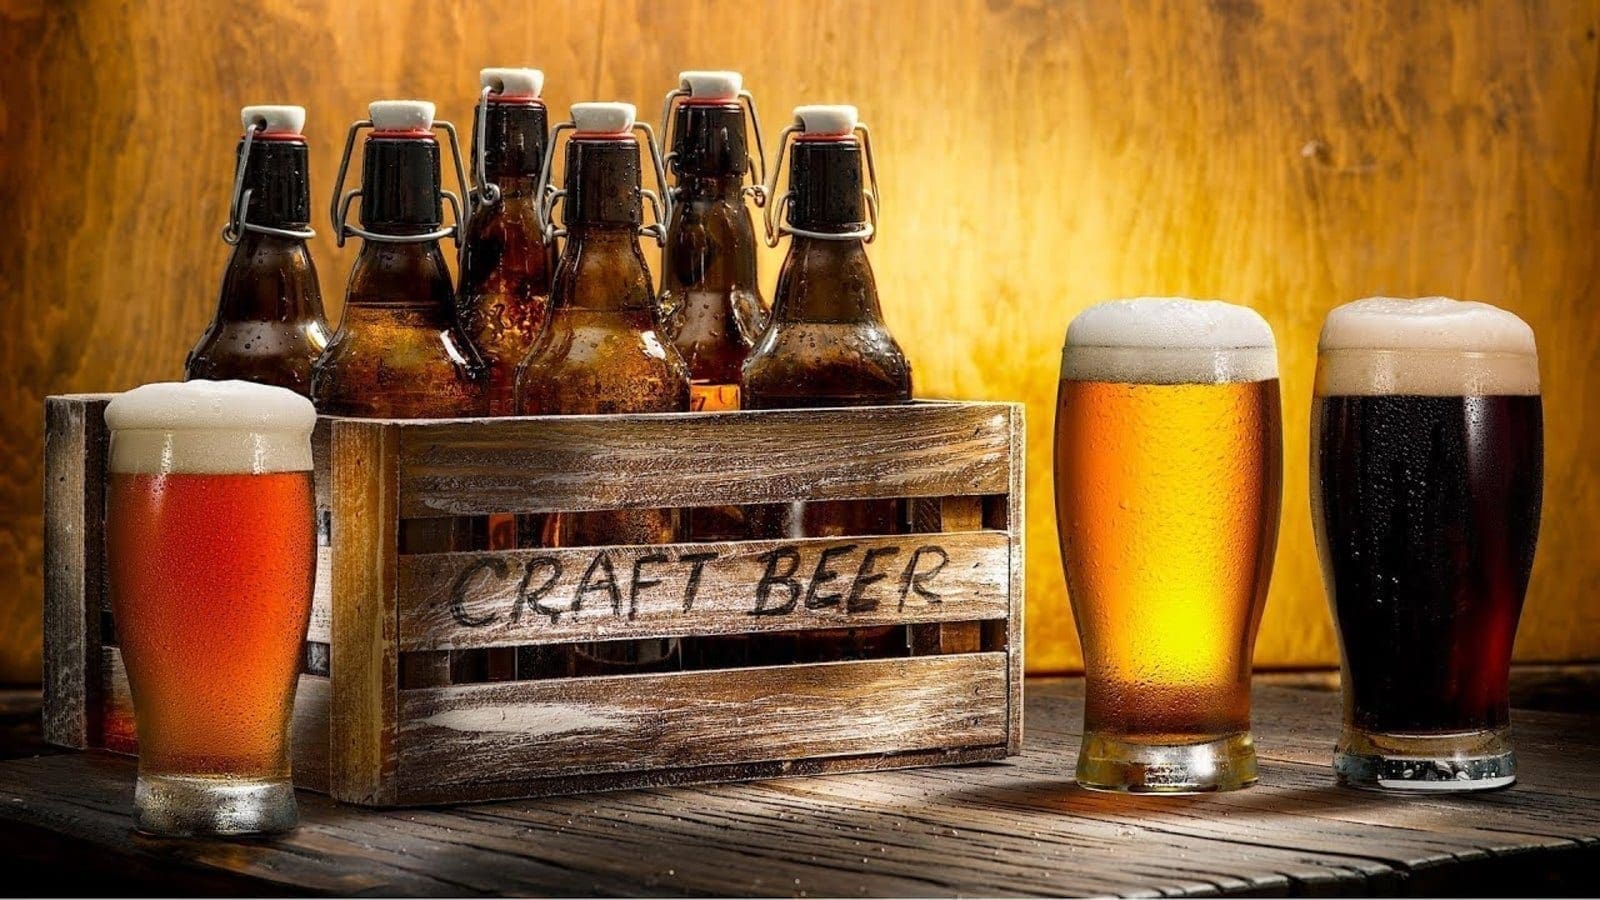 South African beer lobby leads petition to allow sale of craft beer in grocery stores 